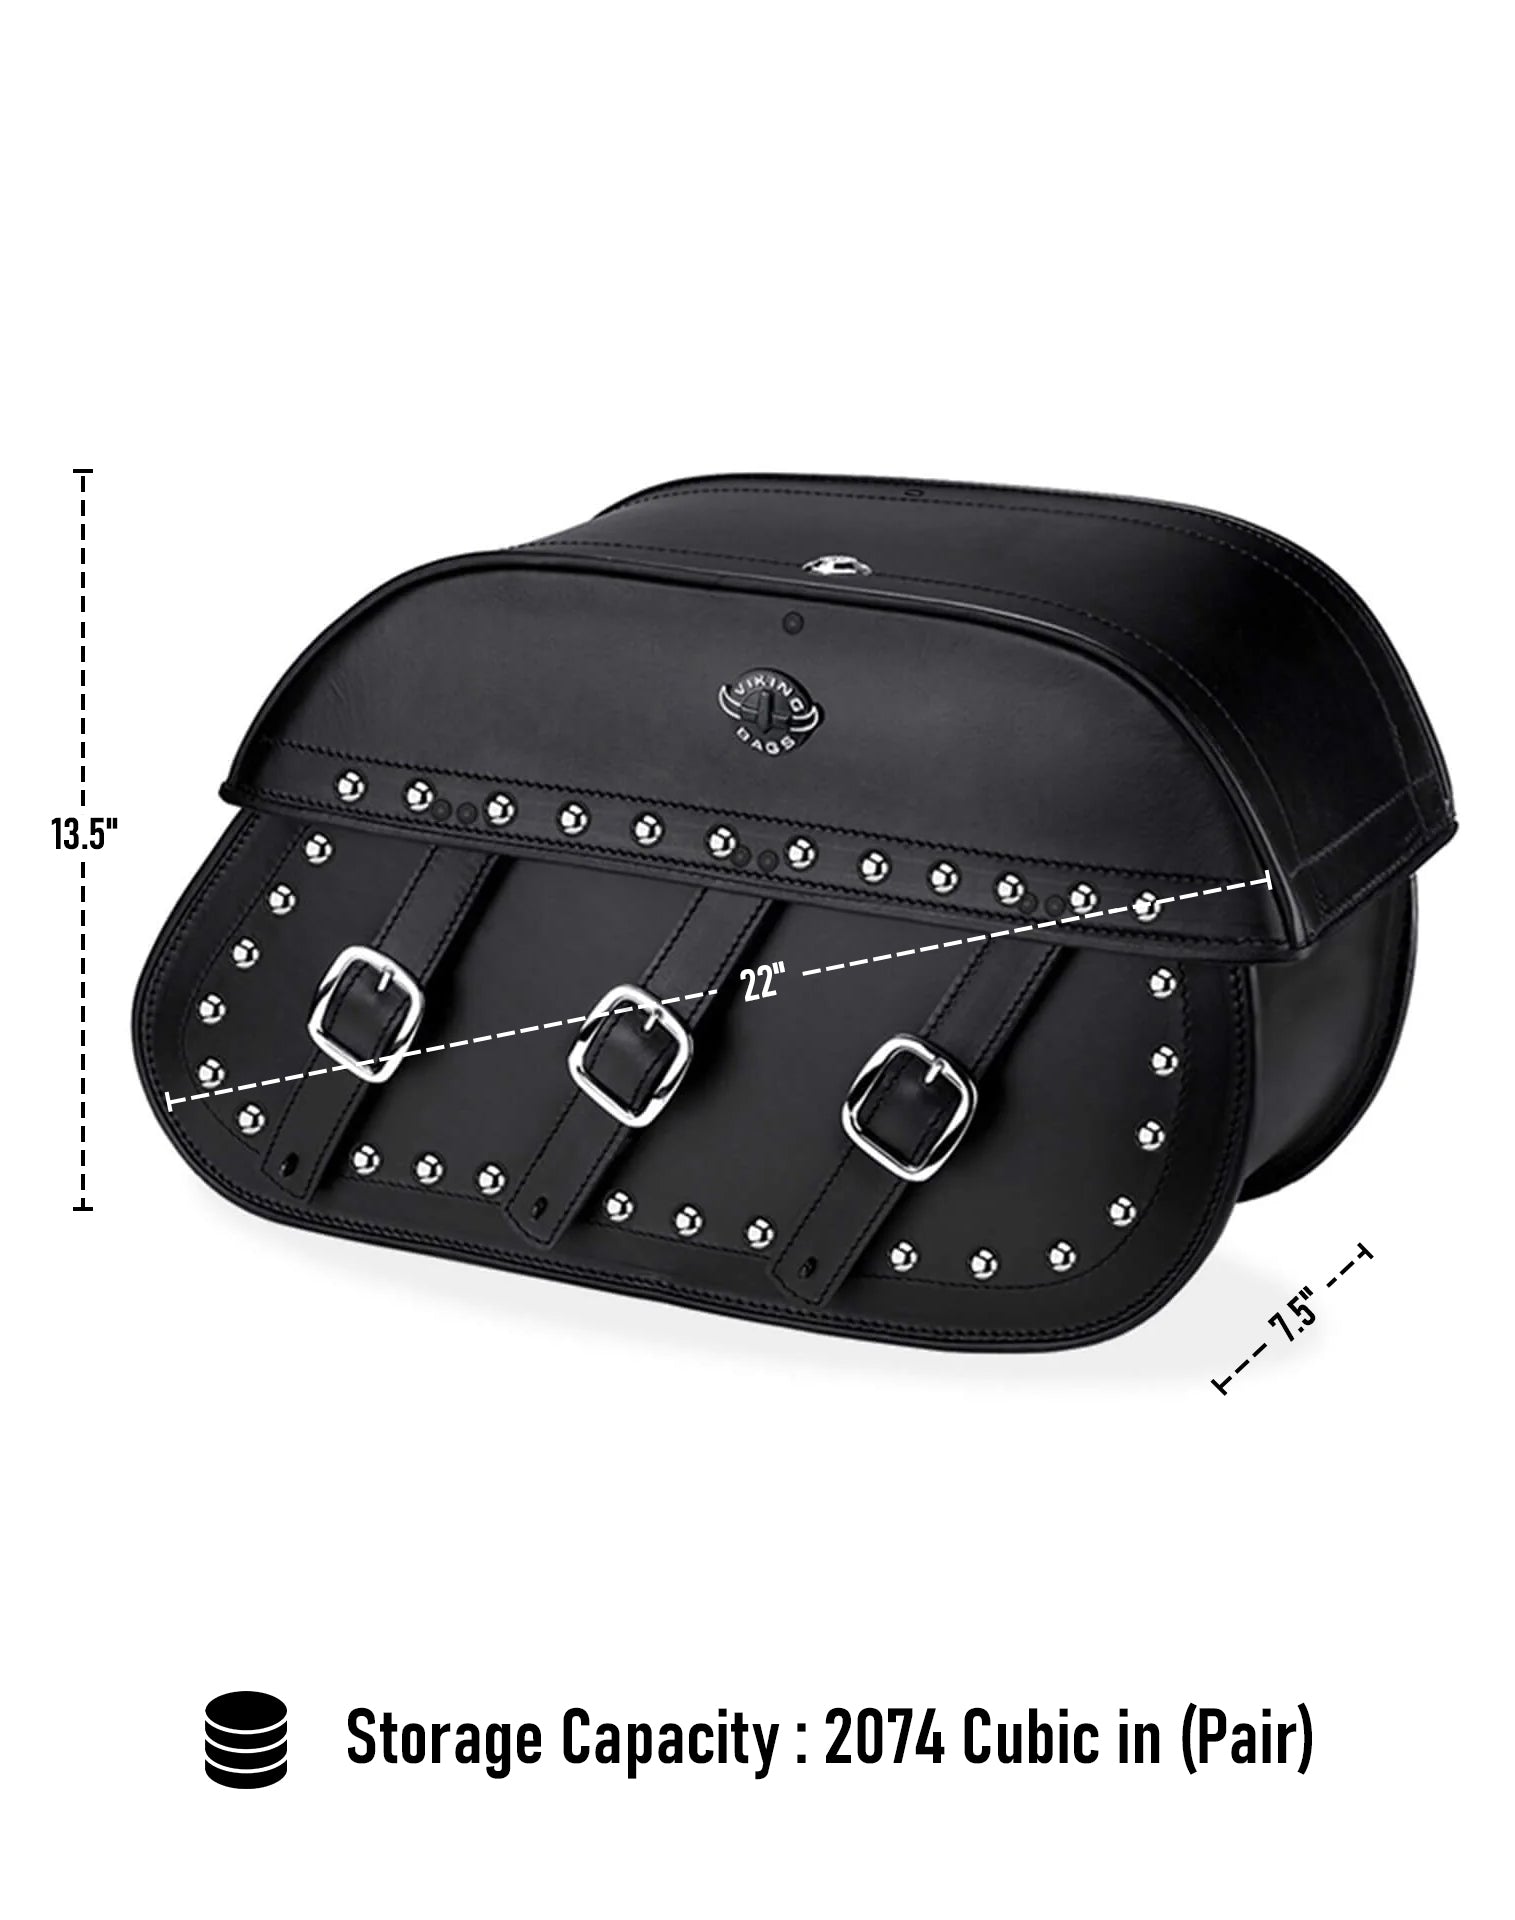 Viking Trianon Extra Large Indian Vintage Darkhorse Studded Leather Motorcycle Saddlebags Can Store Your Ridings Gears